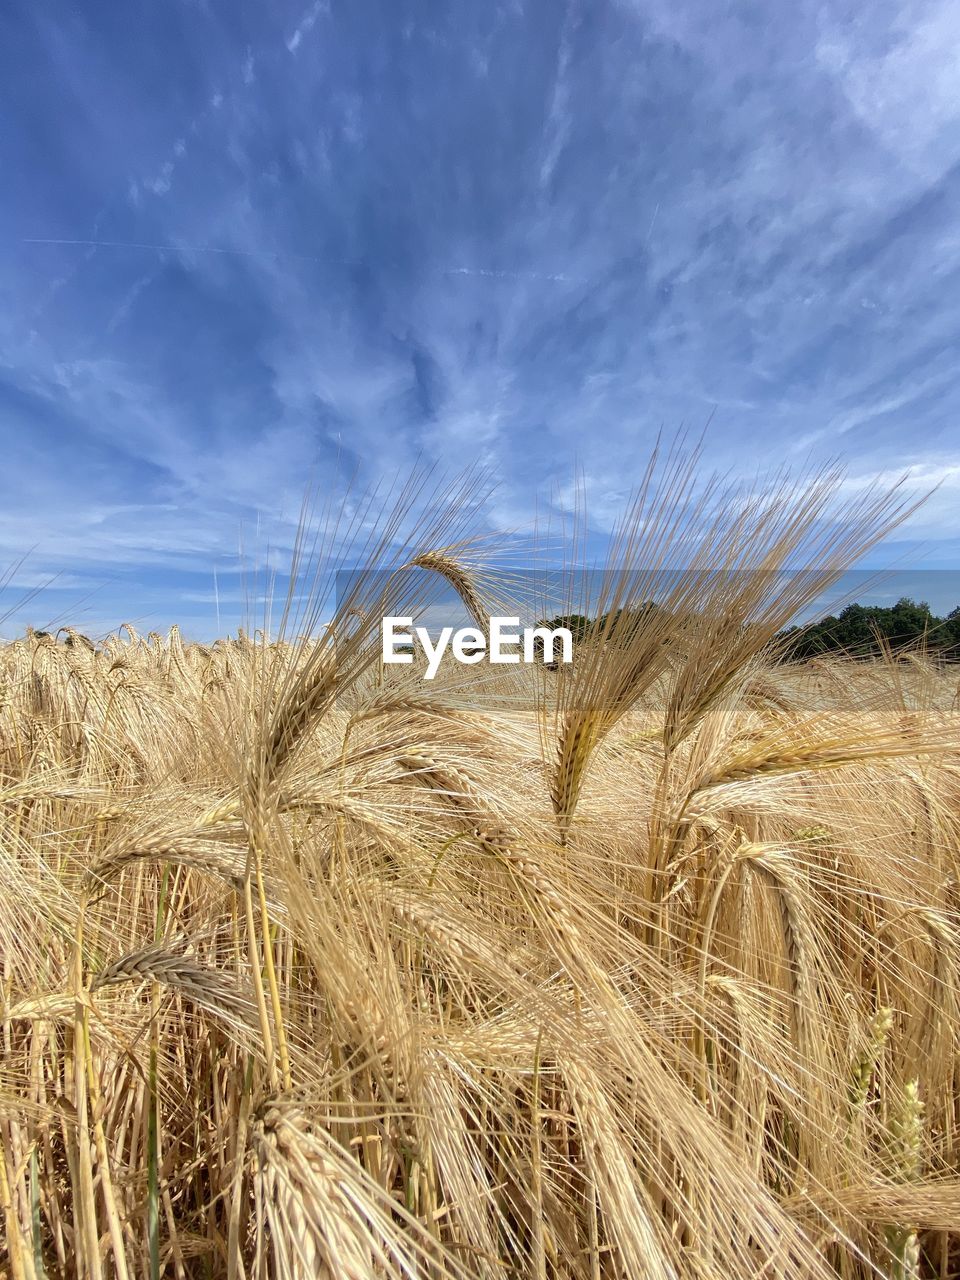 nature, crop, agriculture, cereal plant, plant, no people, rural scene, straw, landscape, day, blue, food, grass, outdoors, sky, sunlight, close-up, field, land, farm, wheat, barley, growth, environment, beauty in nature, hay